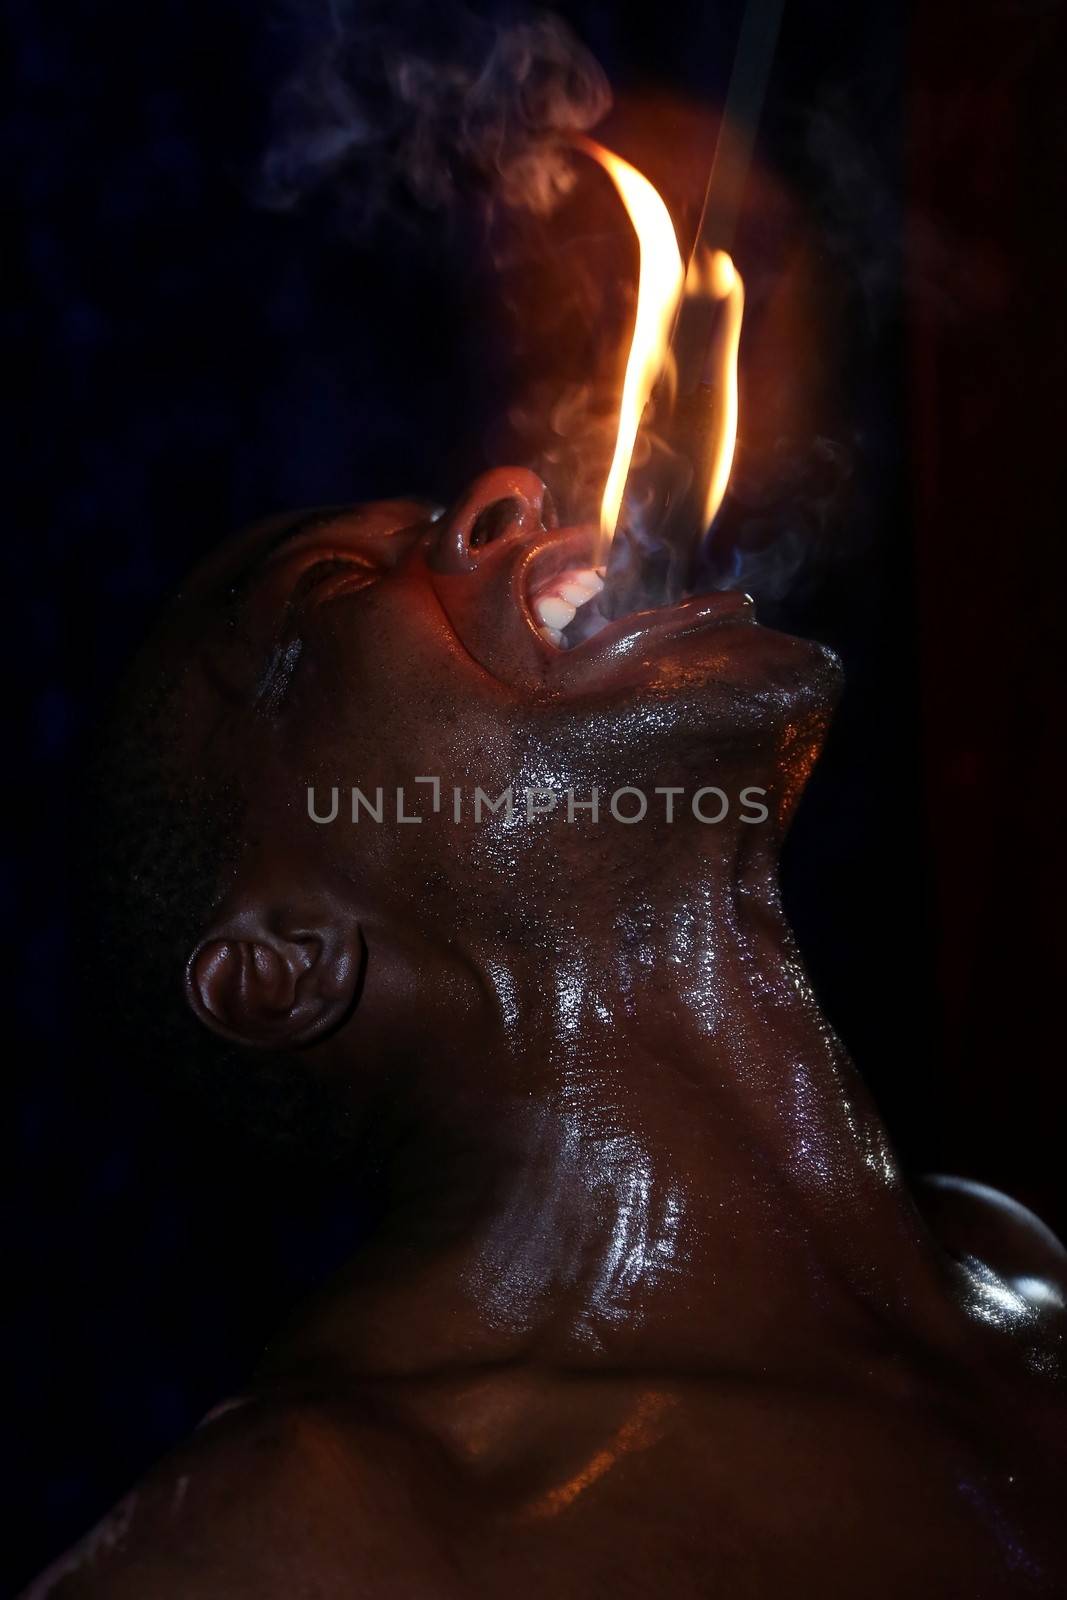 Circus fire-eater eating a fire stick in his mouth